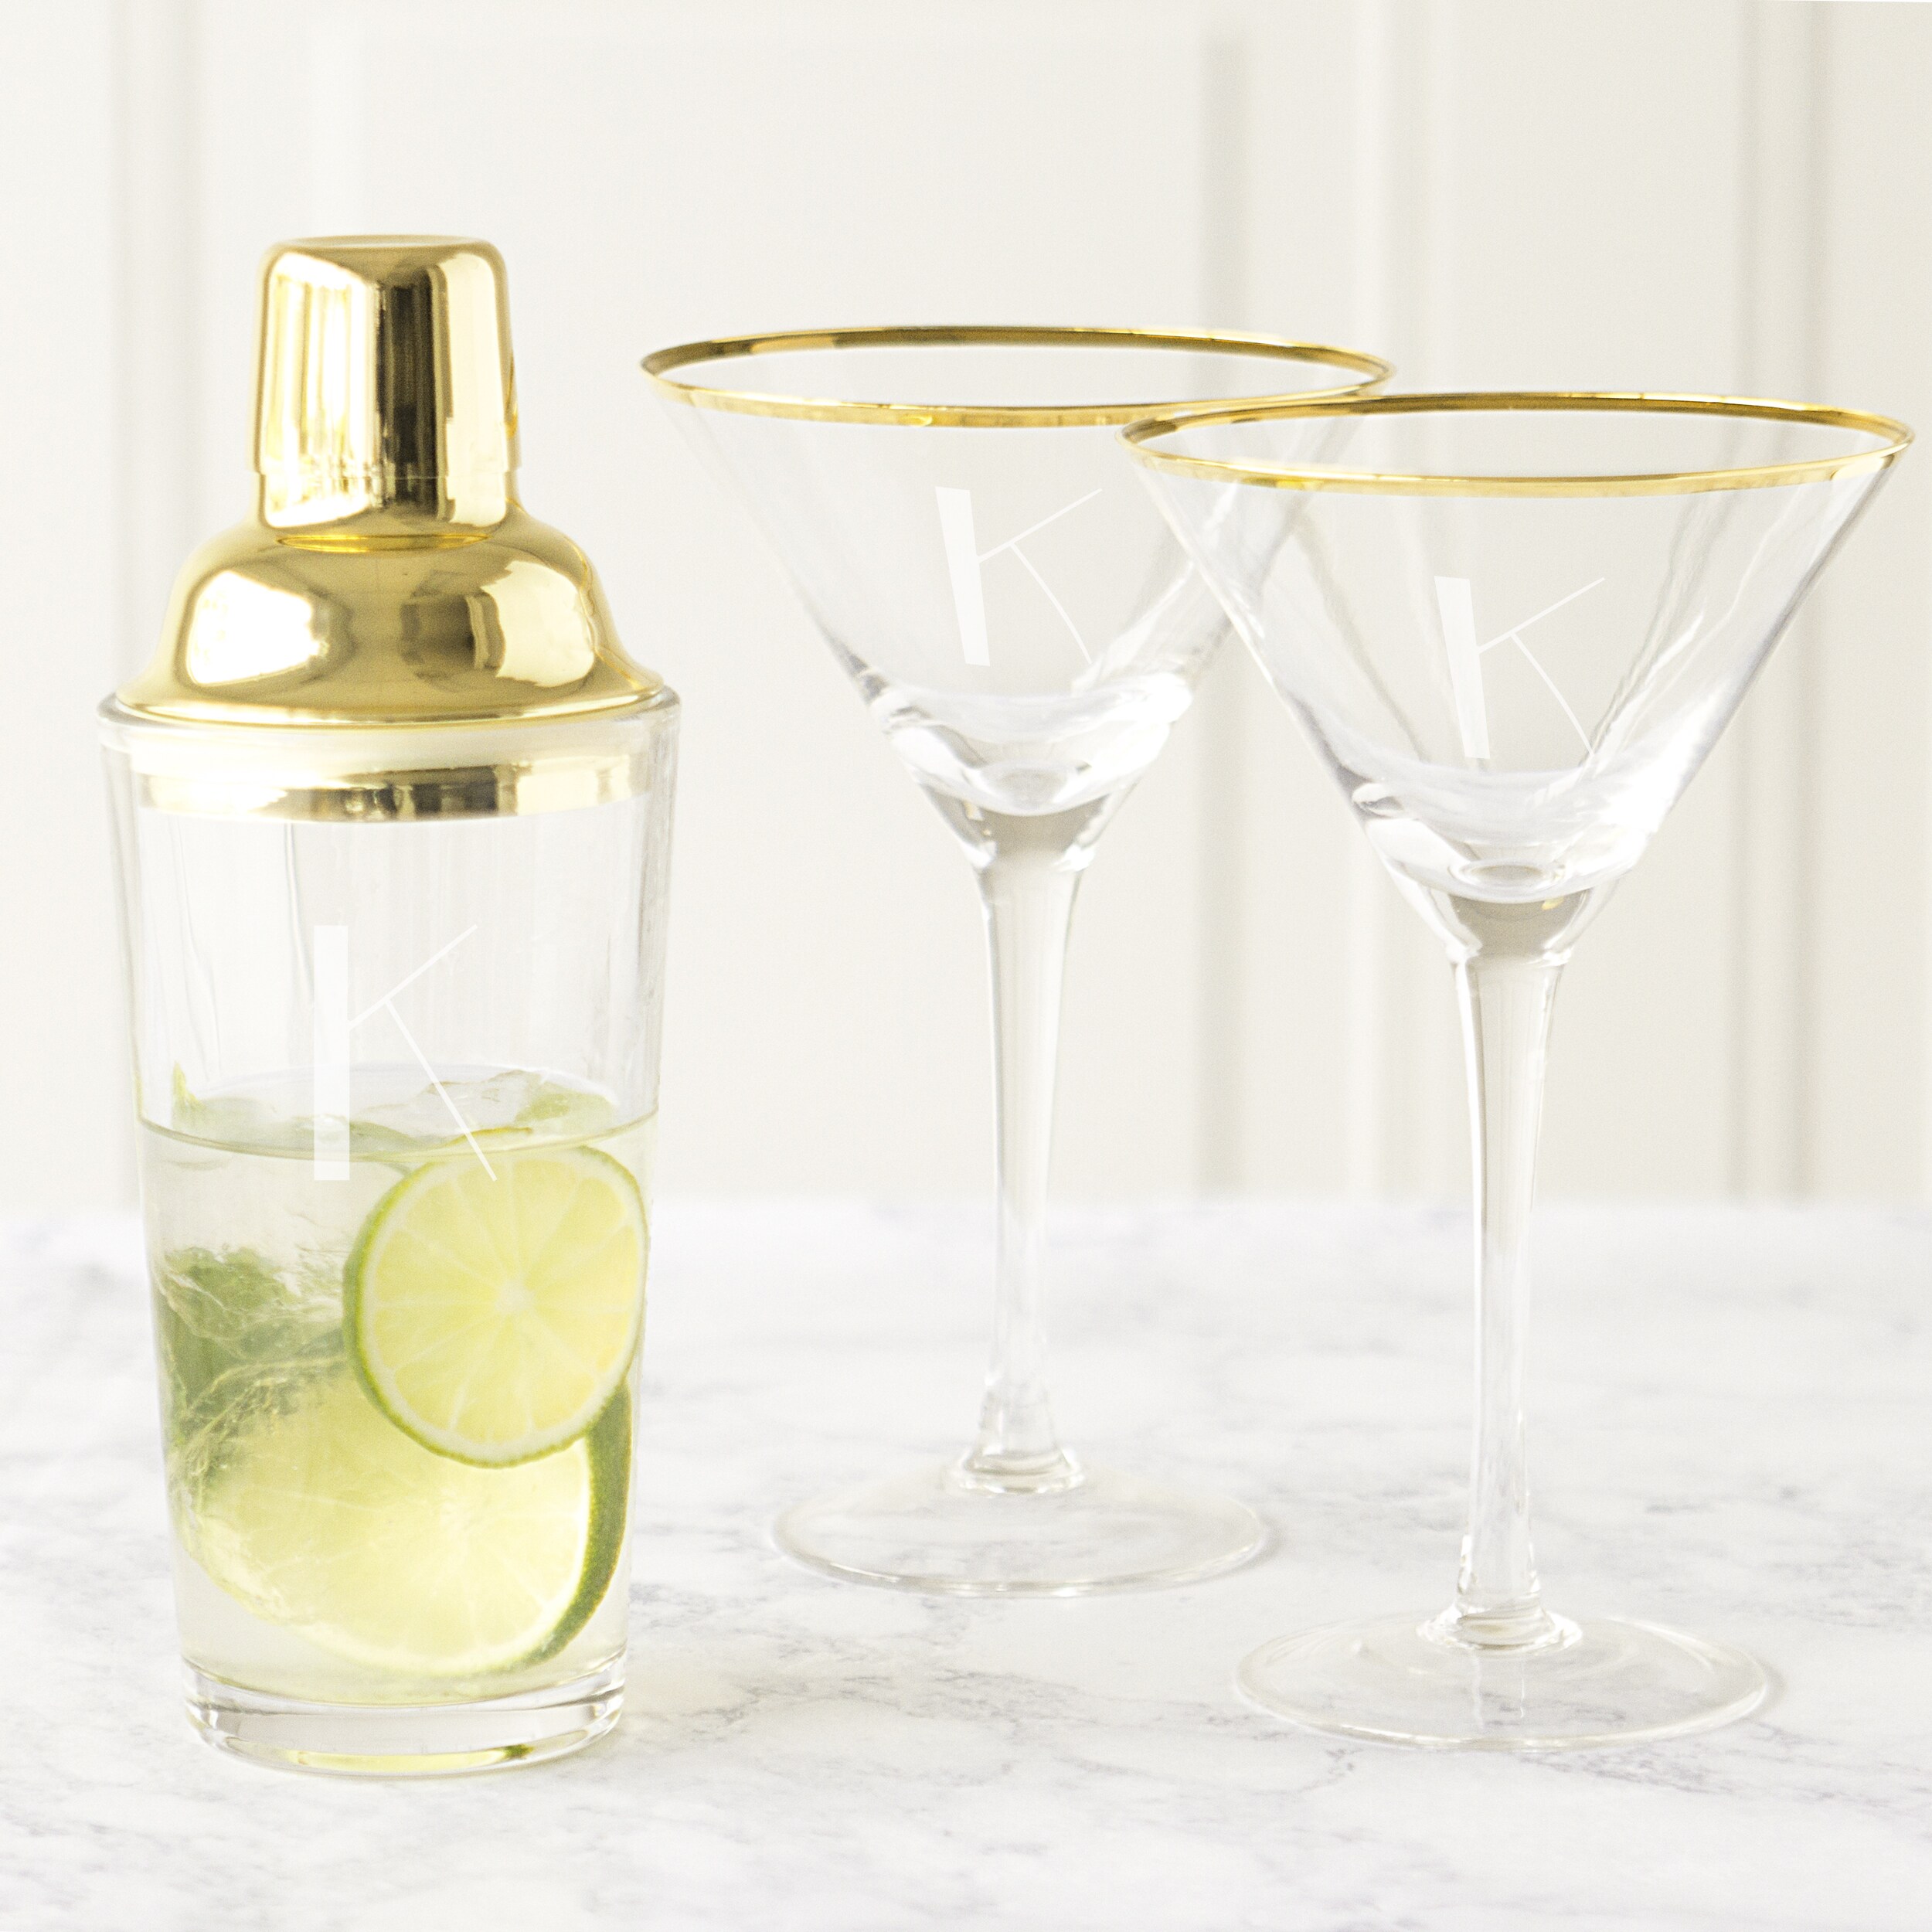 https://ak1.ostkcdn.com/images/products/16807027/Personalized-Gold-Cocktail-Shaker-Set-with-Gold-Rim-Martini-Glasses-62aea923-0a57-4056-b4ad-a8050ca71e93.jpg